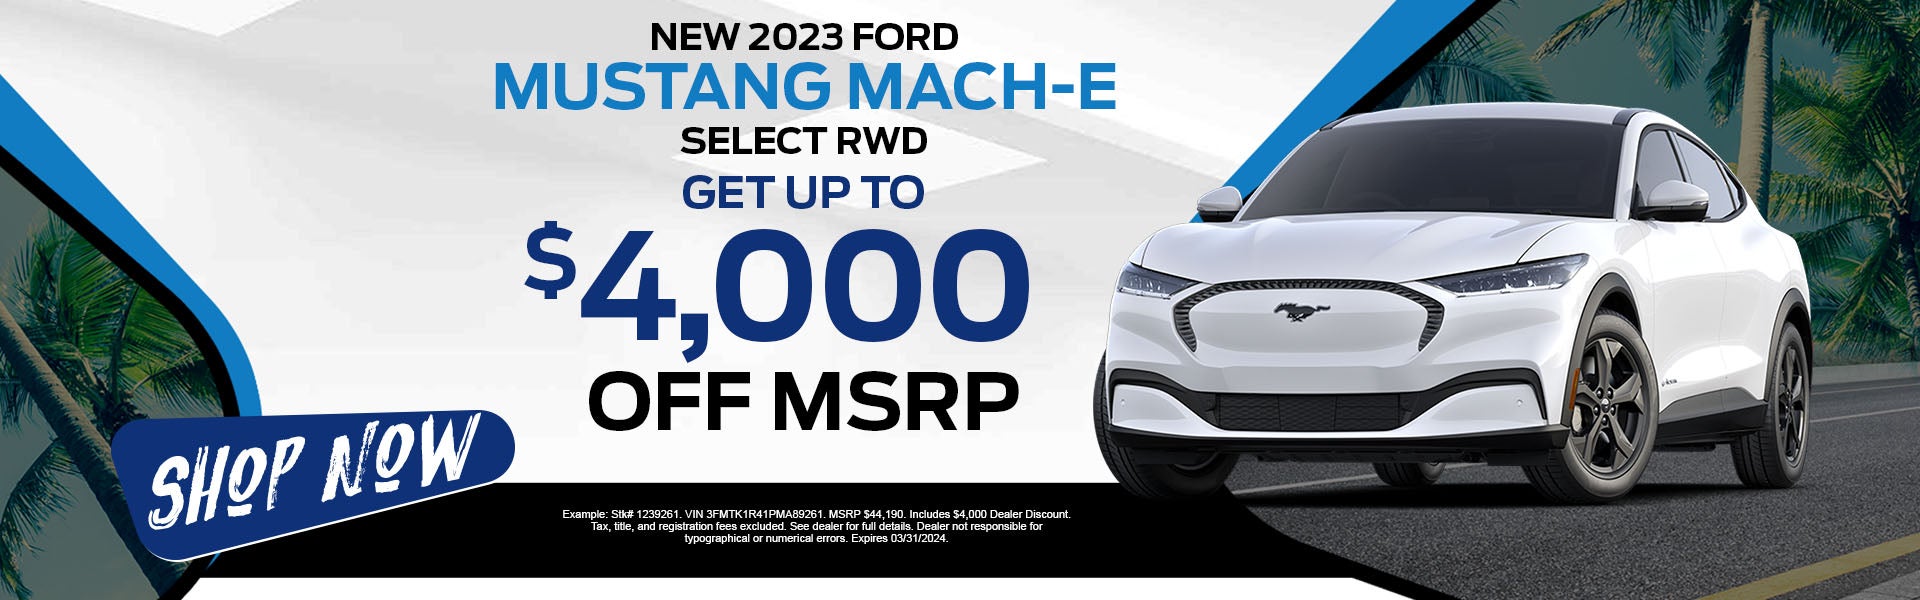 $4,000 off MSRP on a new 2023 Mustang Mach-E